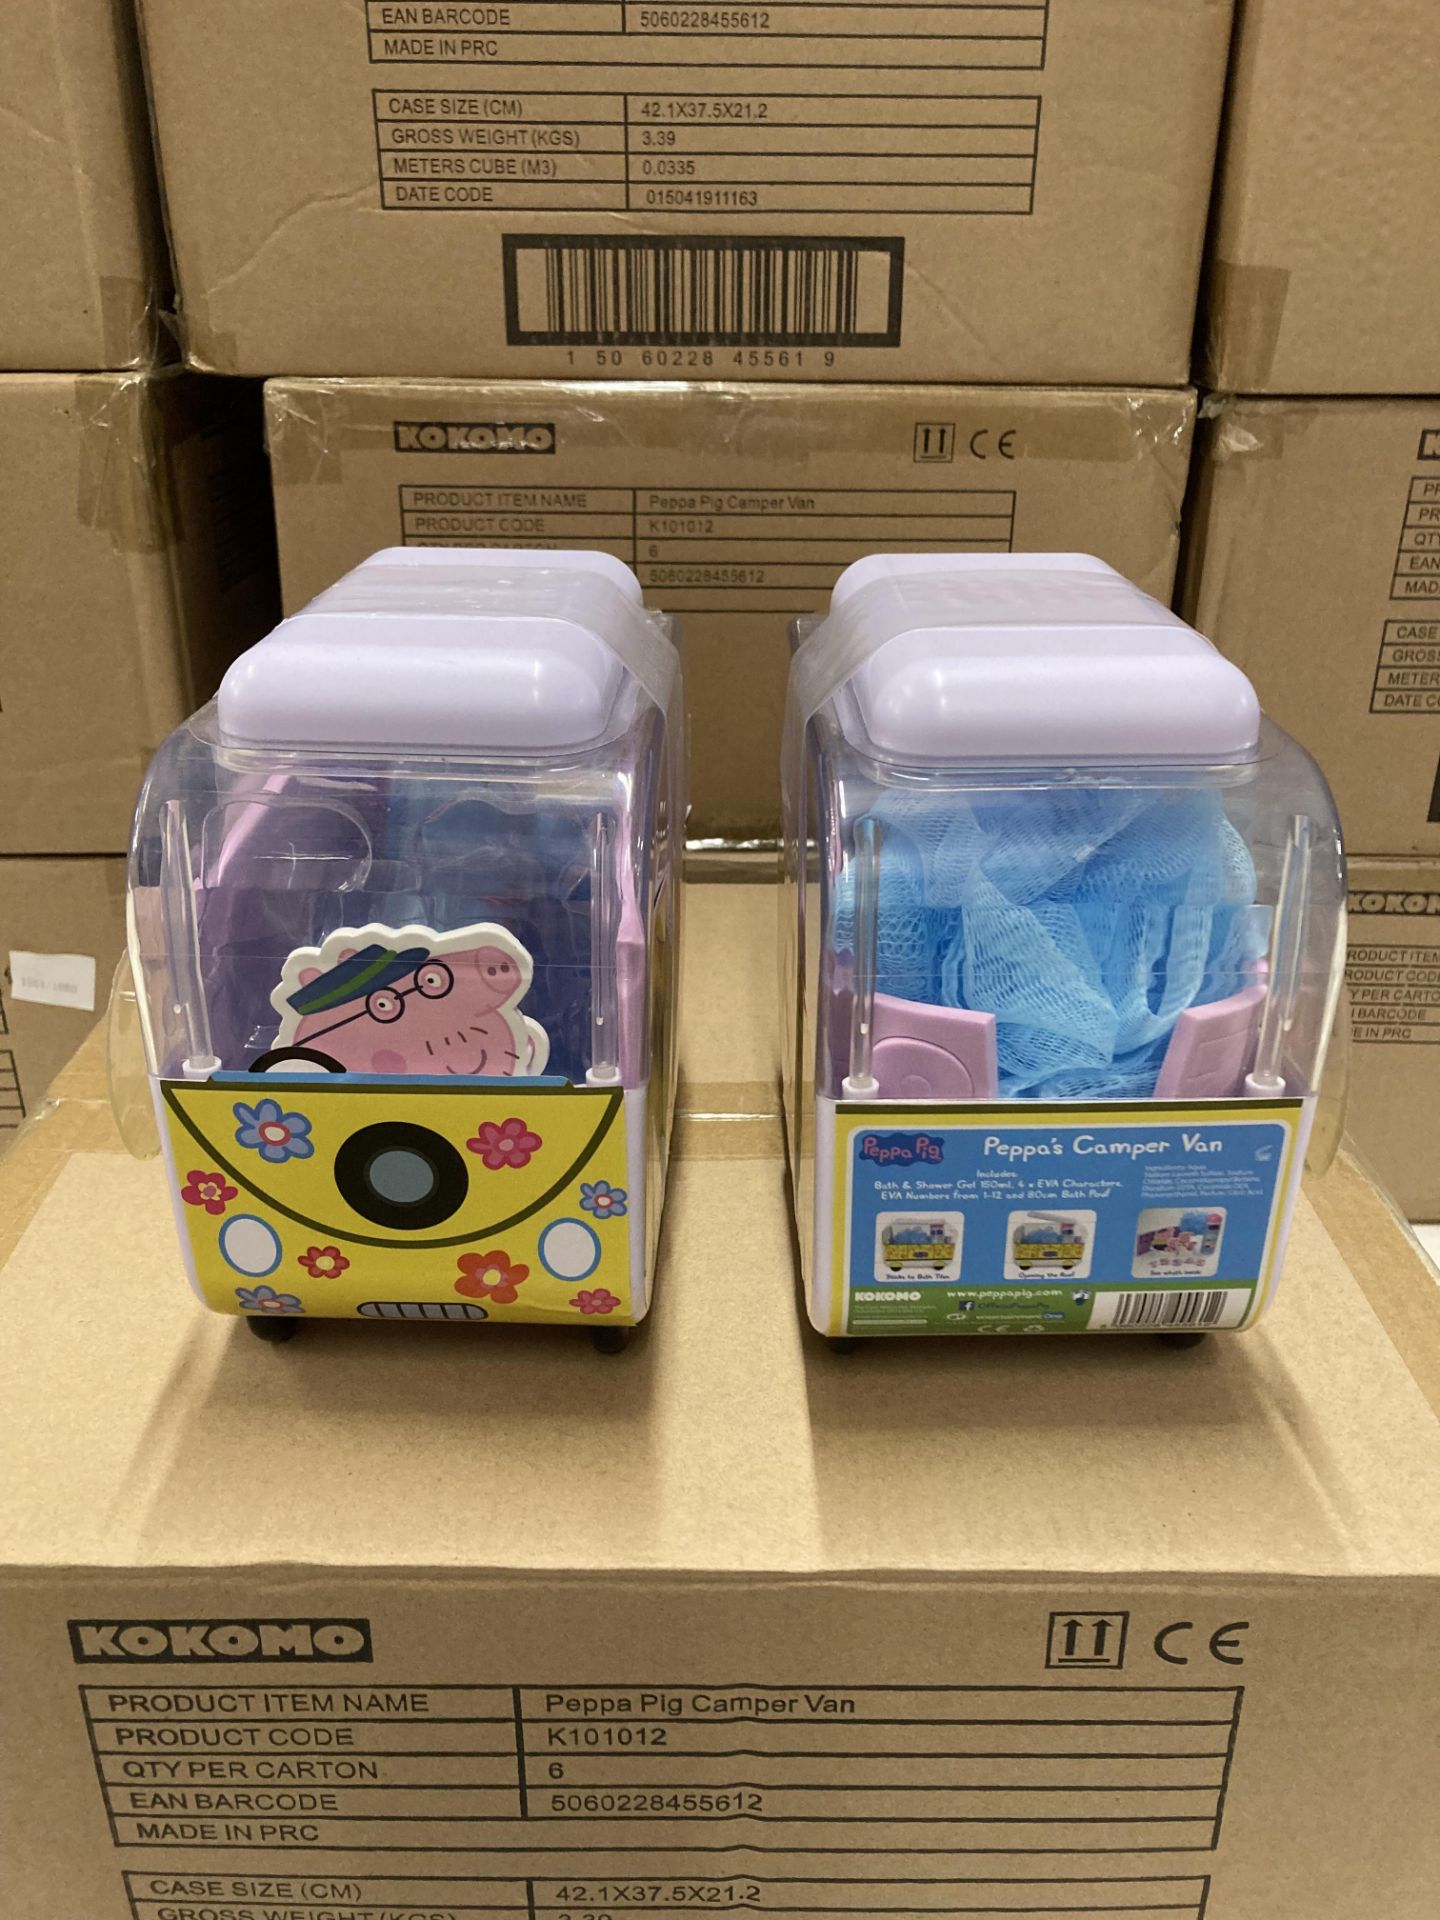 96 x Peppa Pig Campervan Bath Sets (with cut-out Peppa Pig characters, bath numbers, - Image 2 of 3